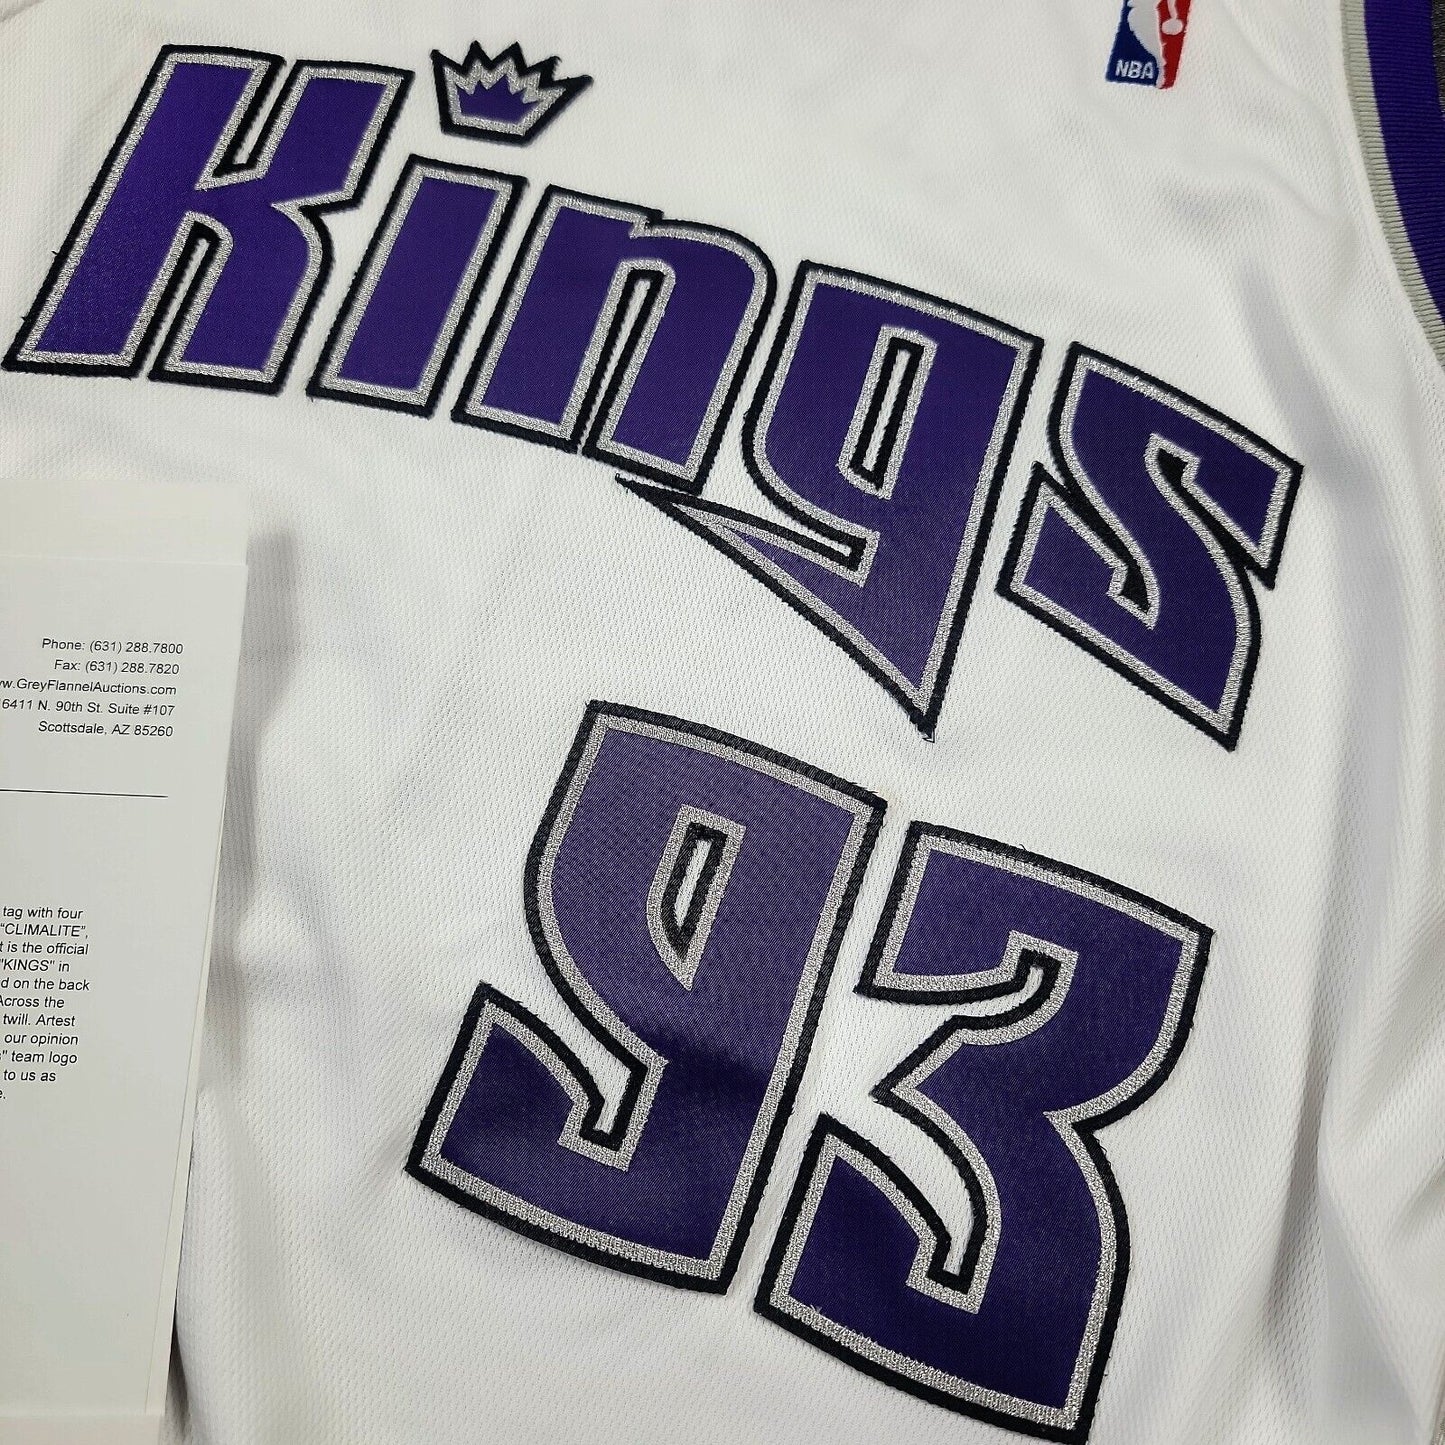 100% Authentic Ron Artest 06 07 Kings Signed Game Used Jersey Grey Flannel JSA